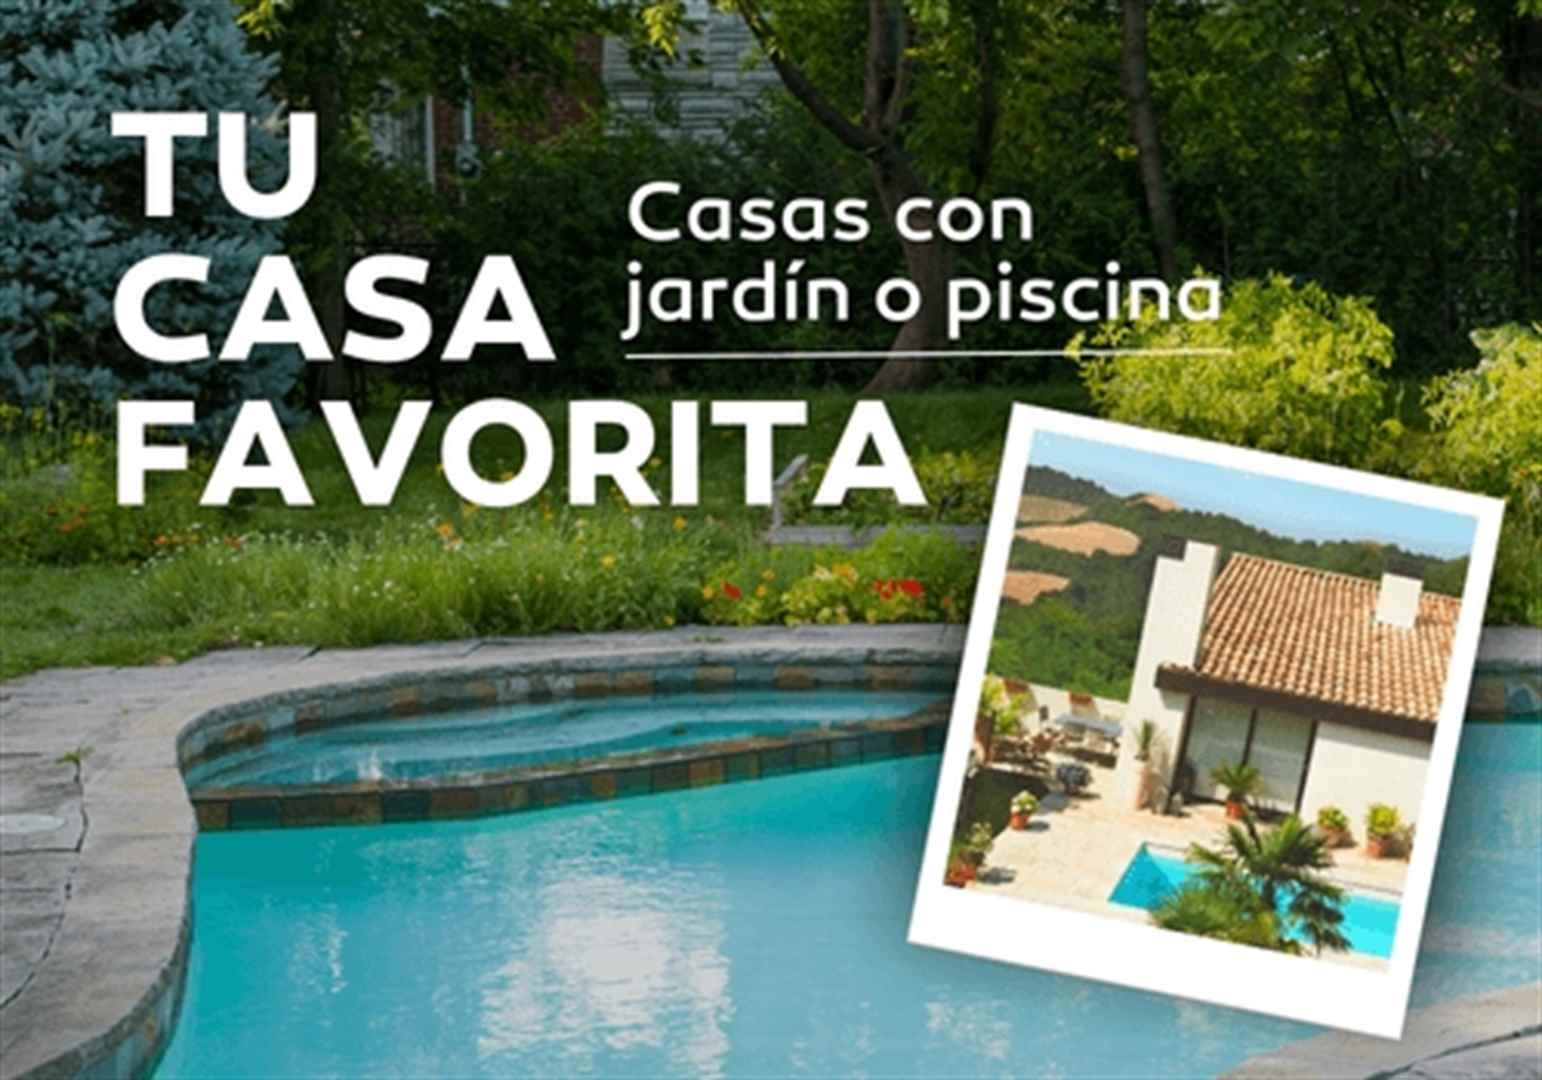 Houses with garden or swimming pool